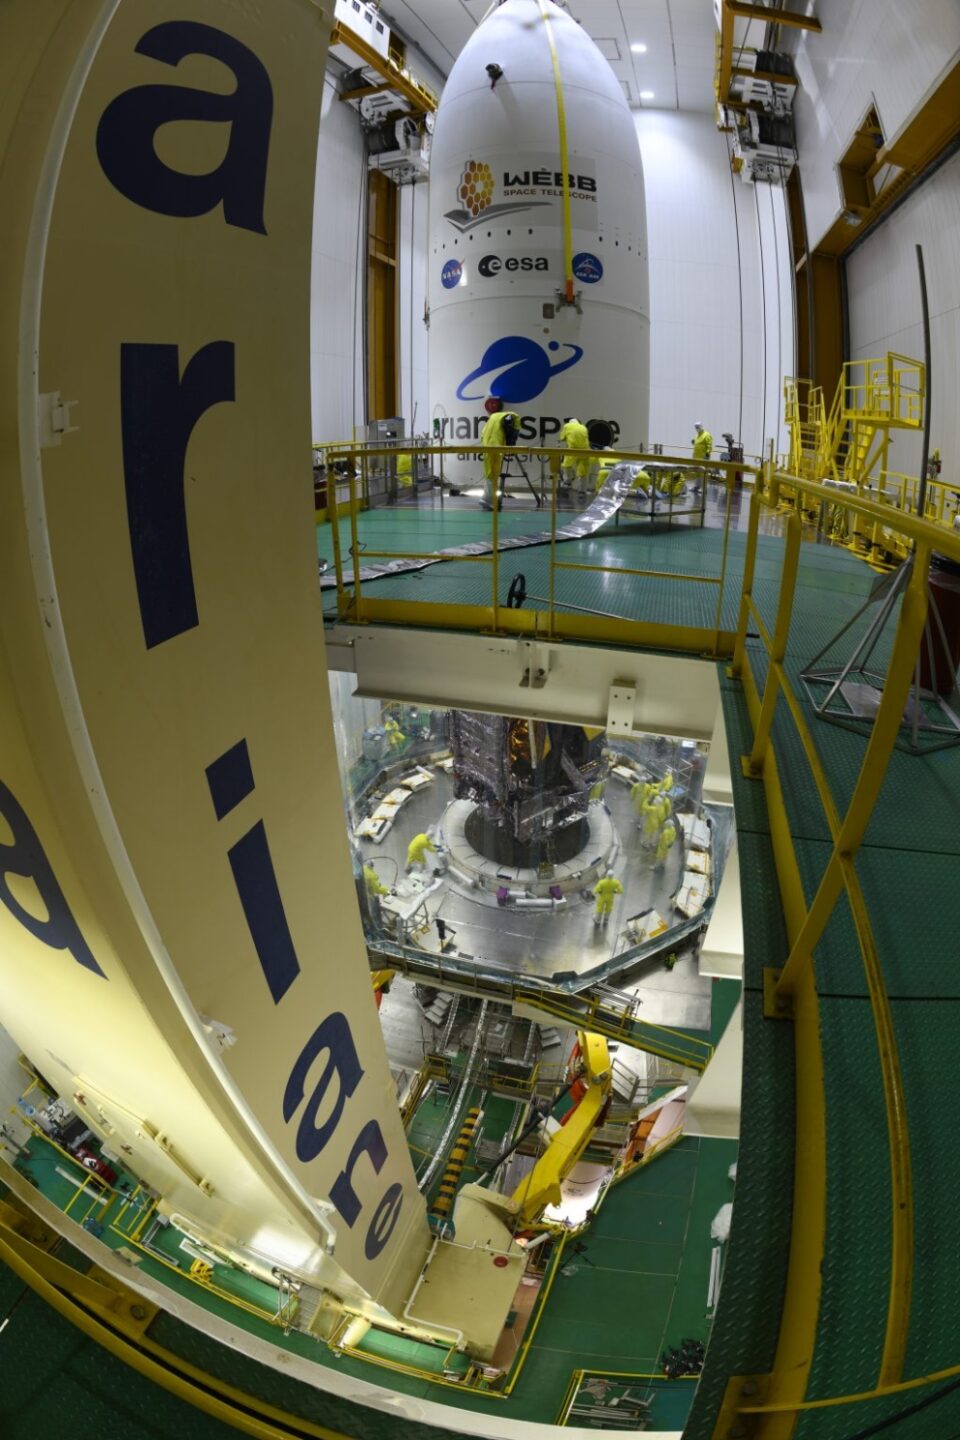 The incredible James Webb Space Telescope is encapsulated for launch next week